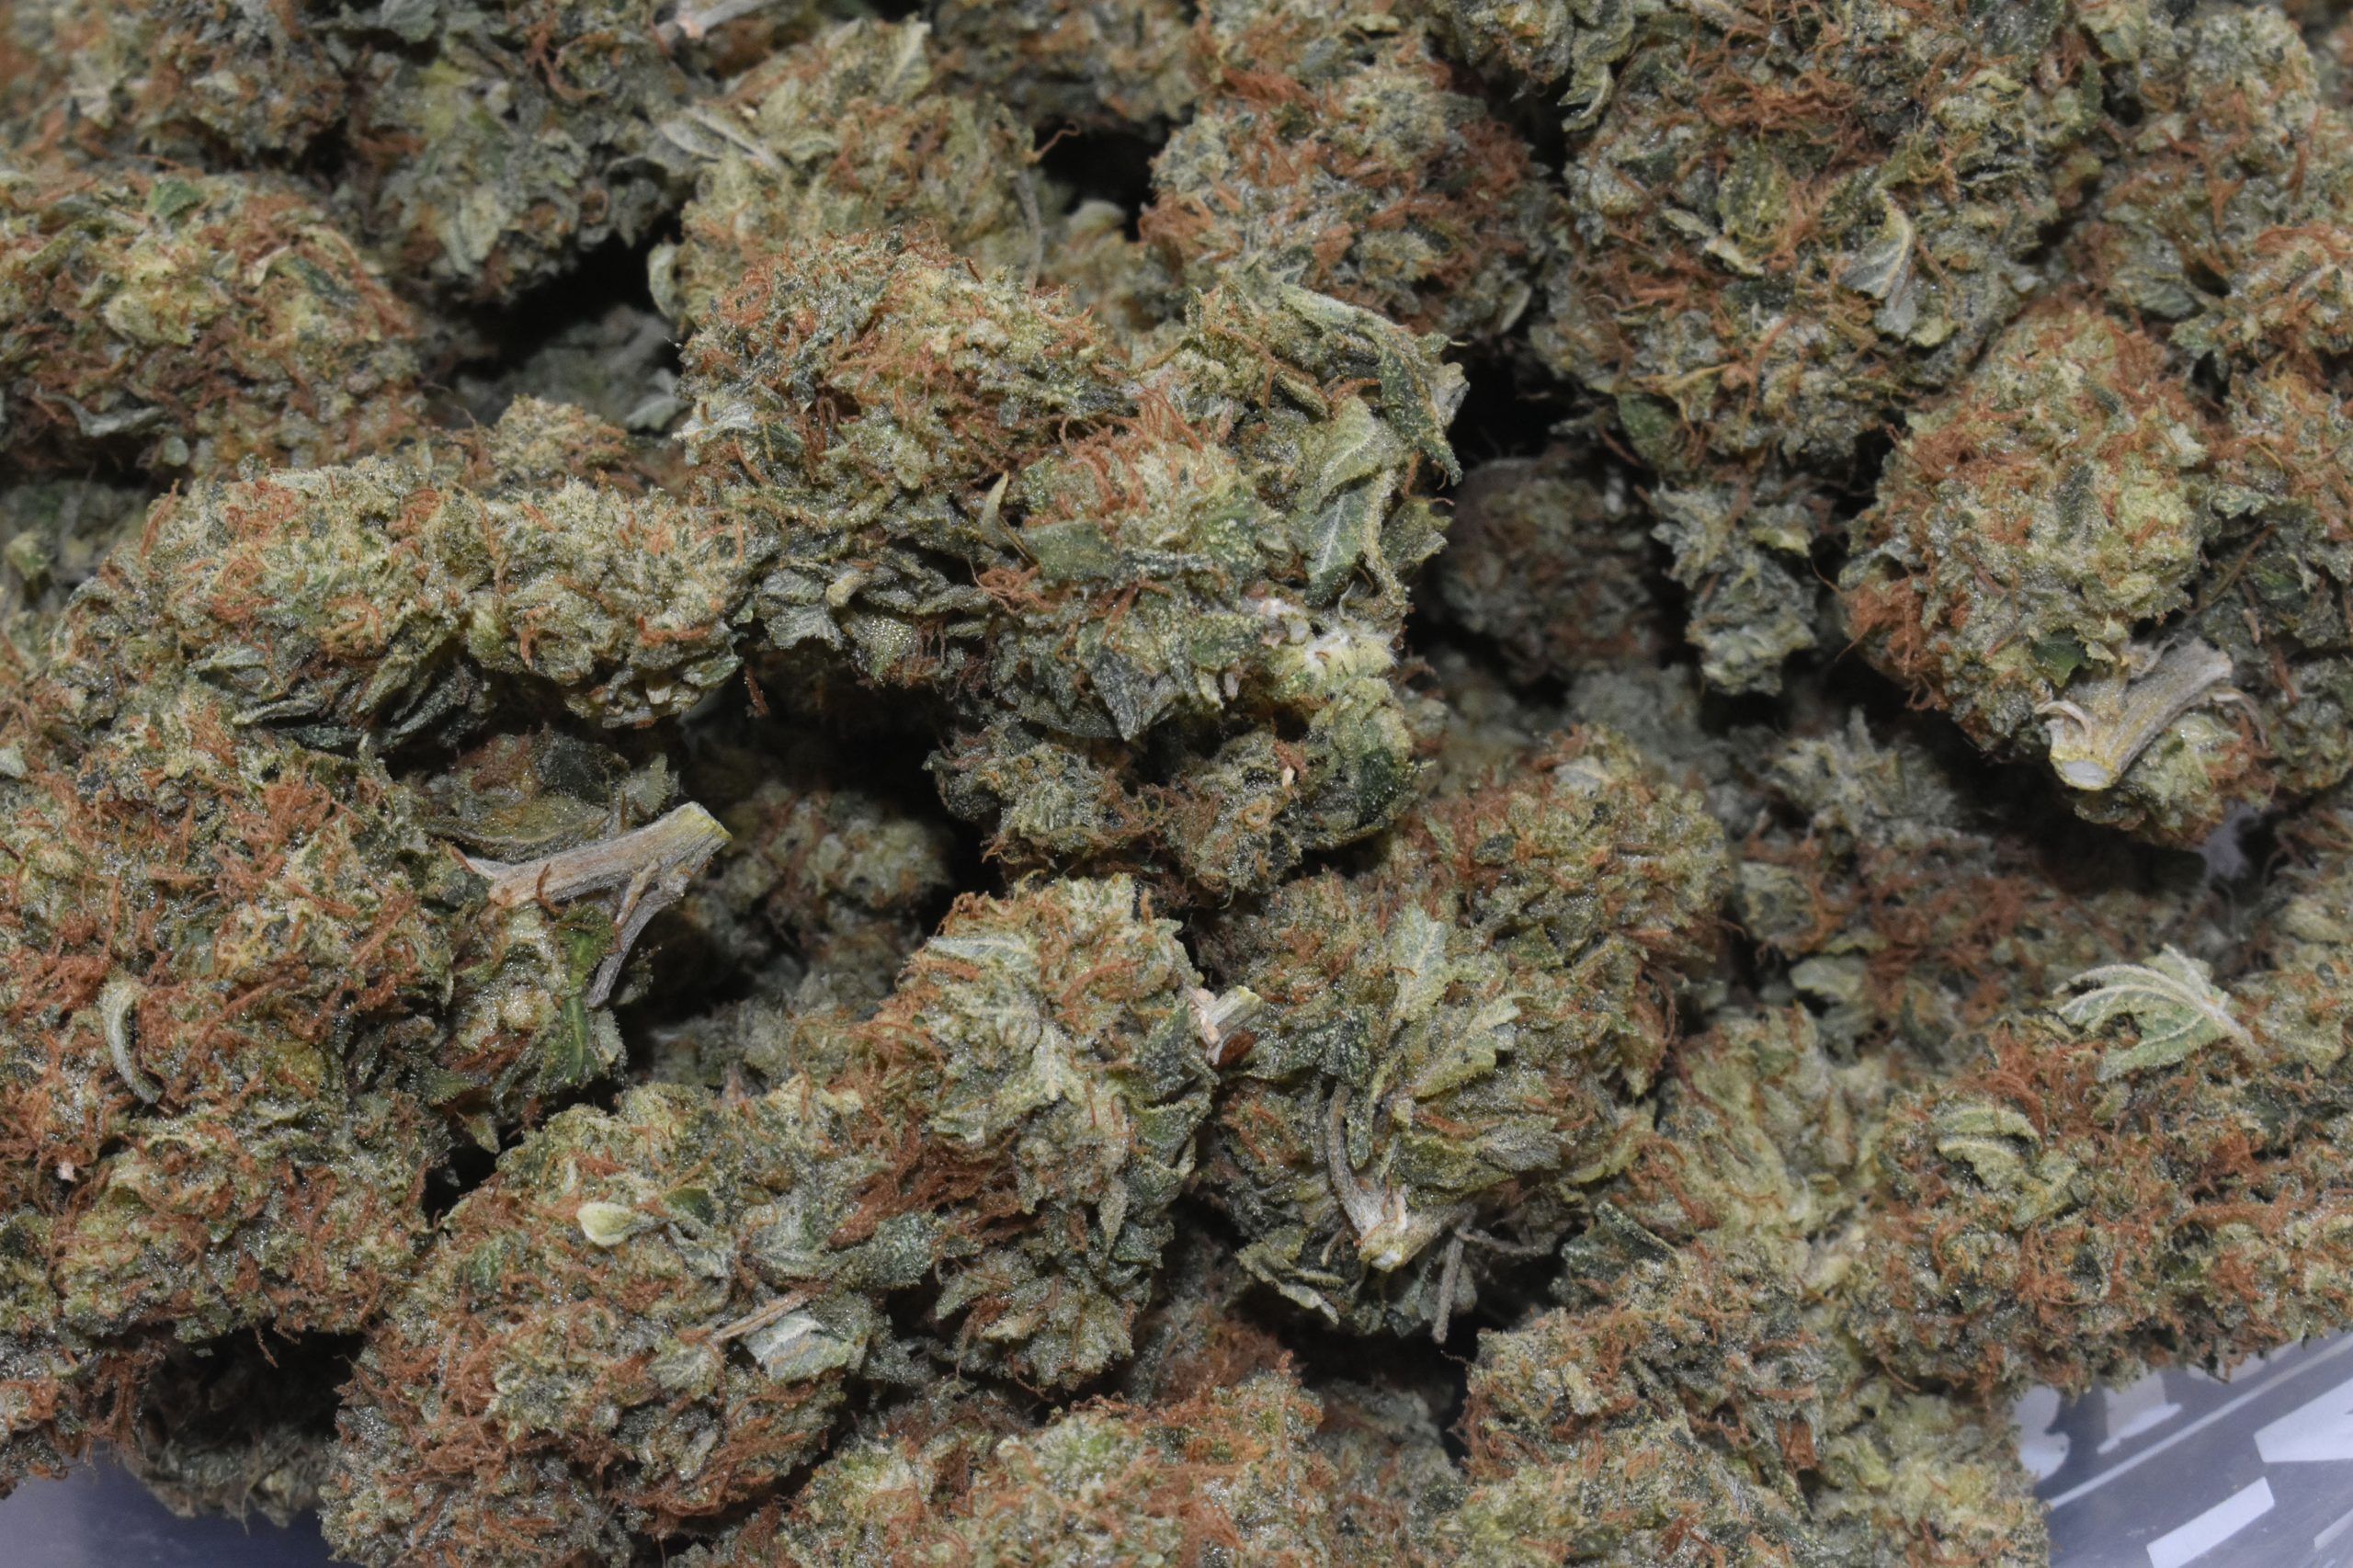 buy-afgooey-at-chronicfarms.cc-online-weed-dispensary